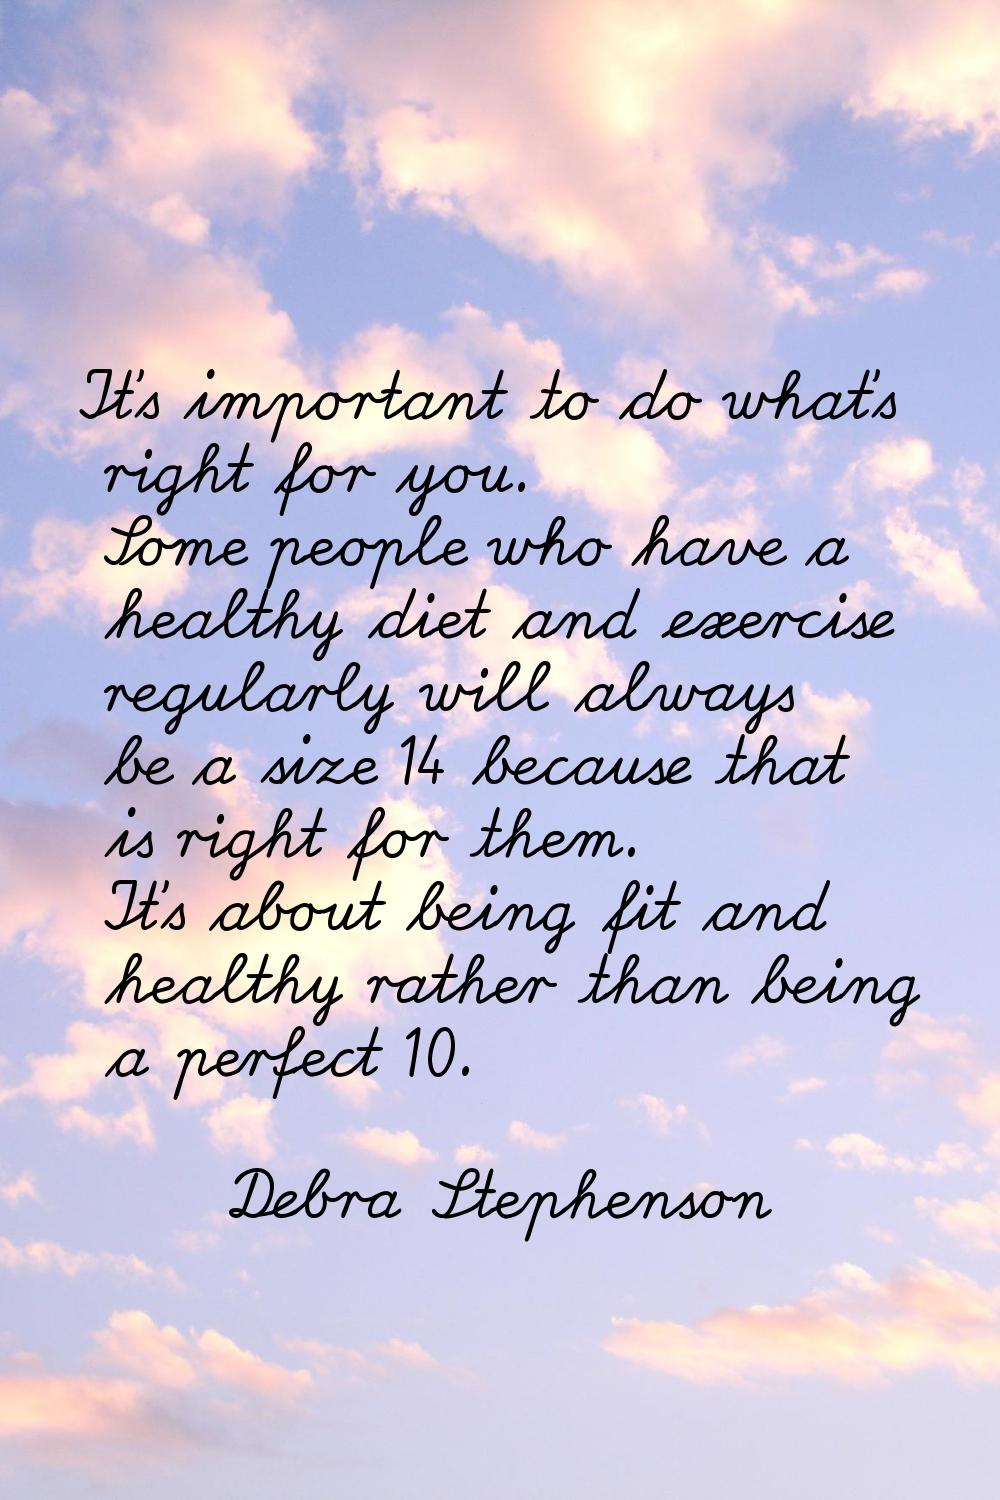 It's important to do what's right for you. Some people who have a healthy diet and exercise regular